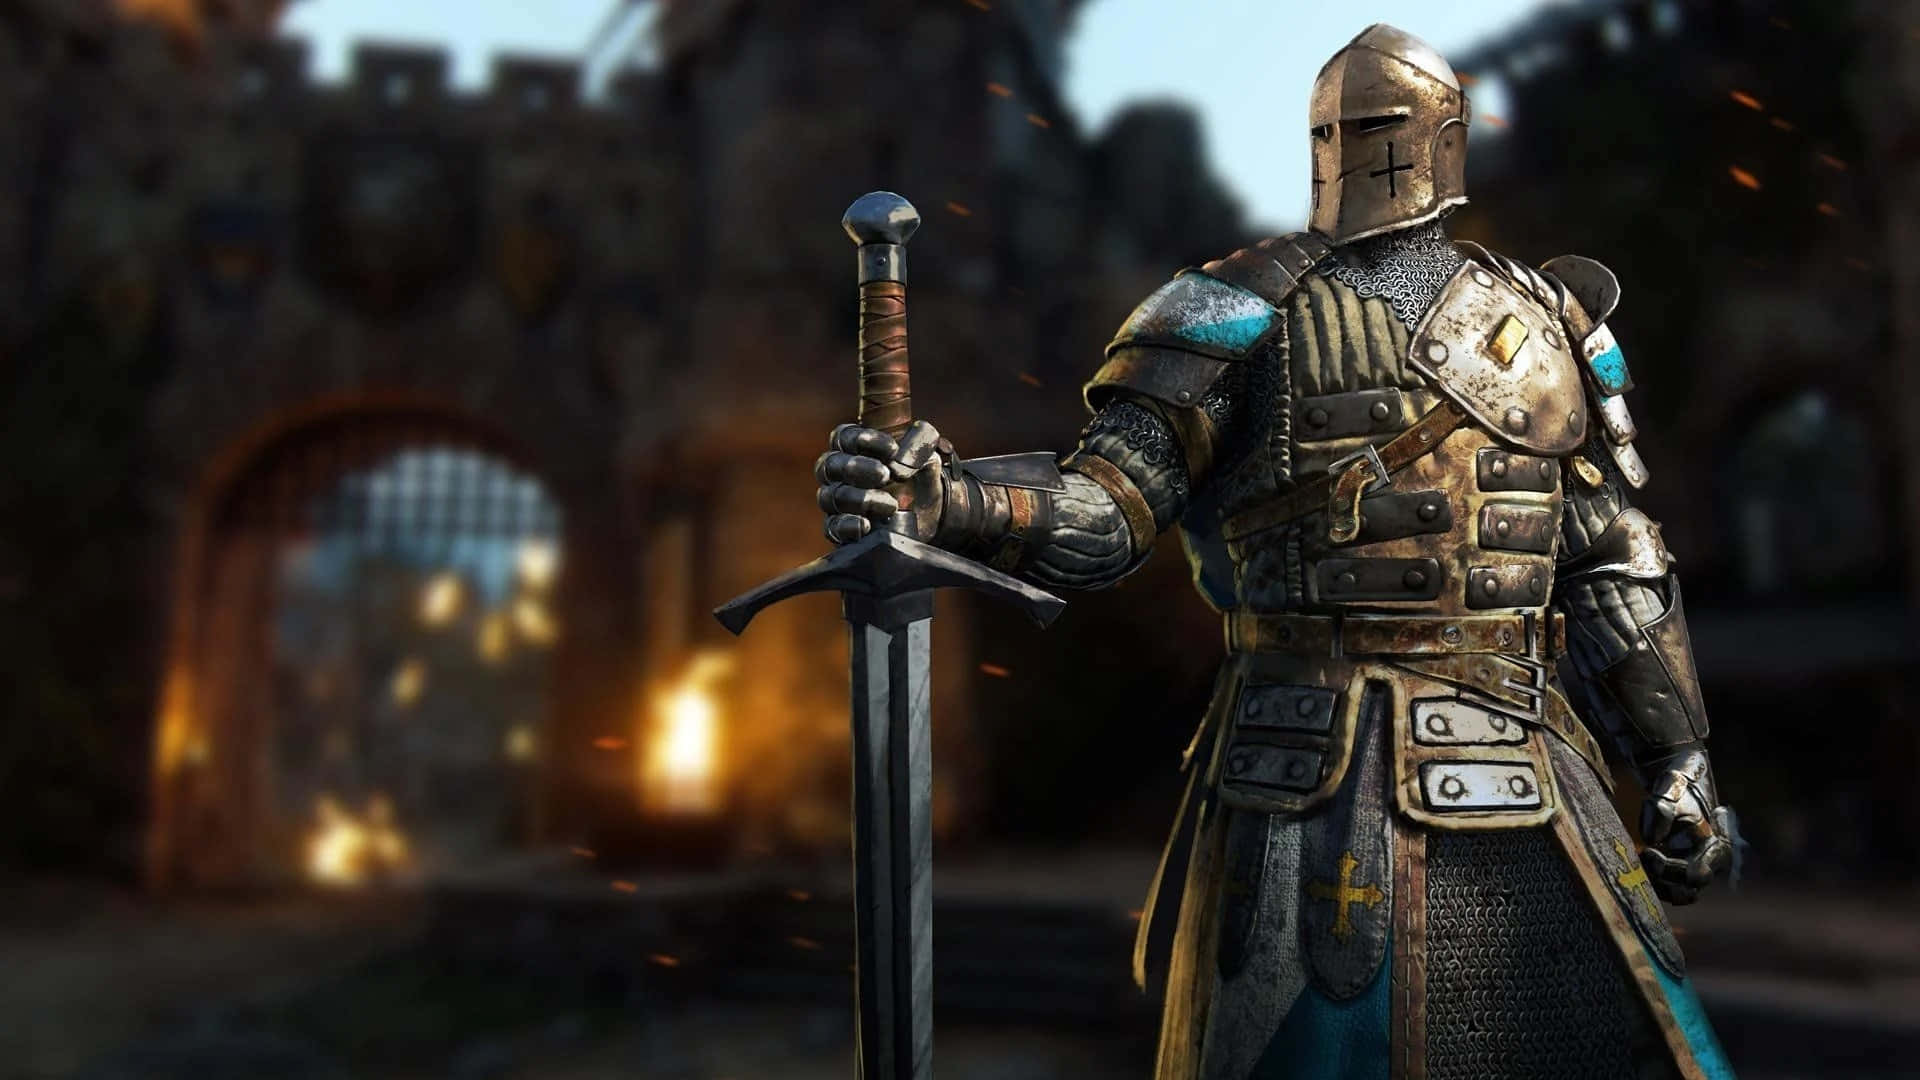 1080p For Honor Background Knight With A Broadsword